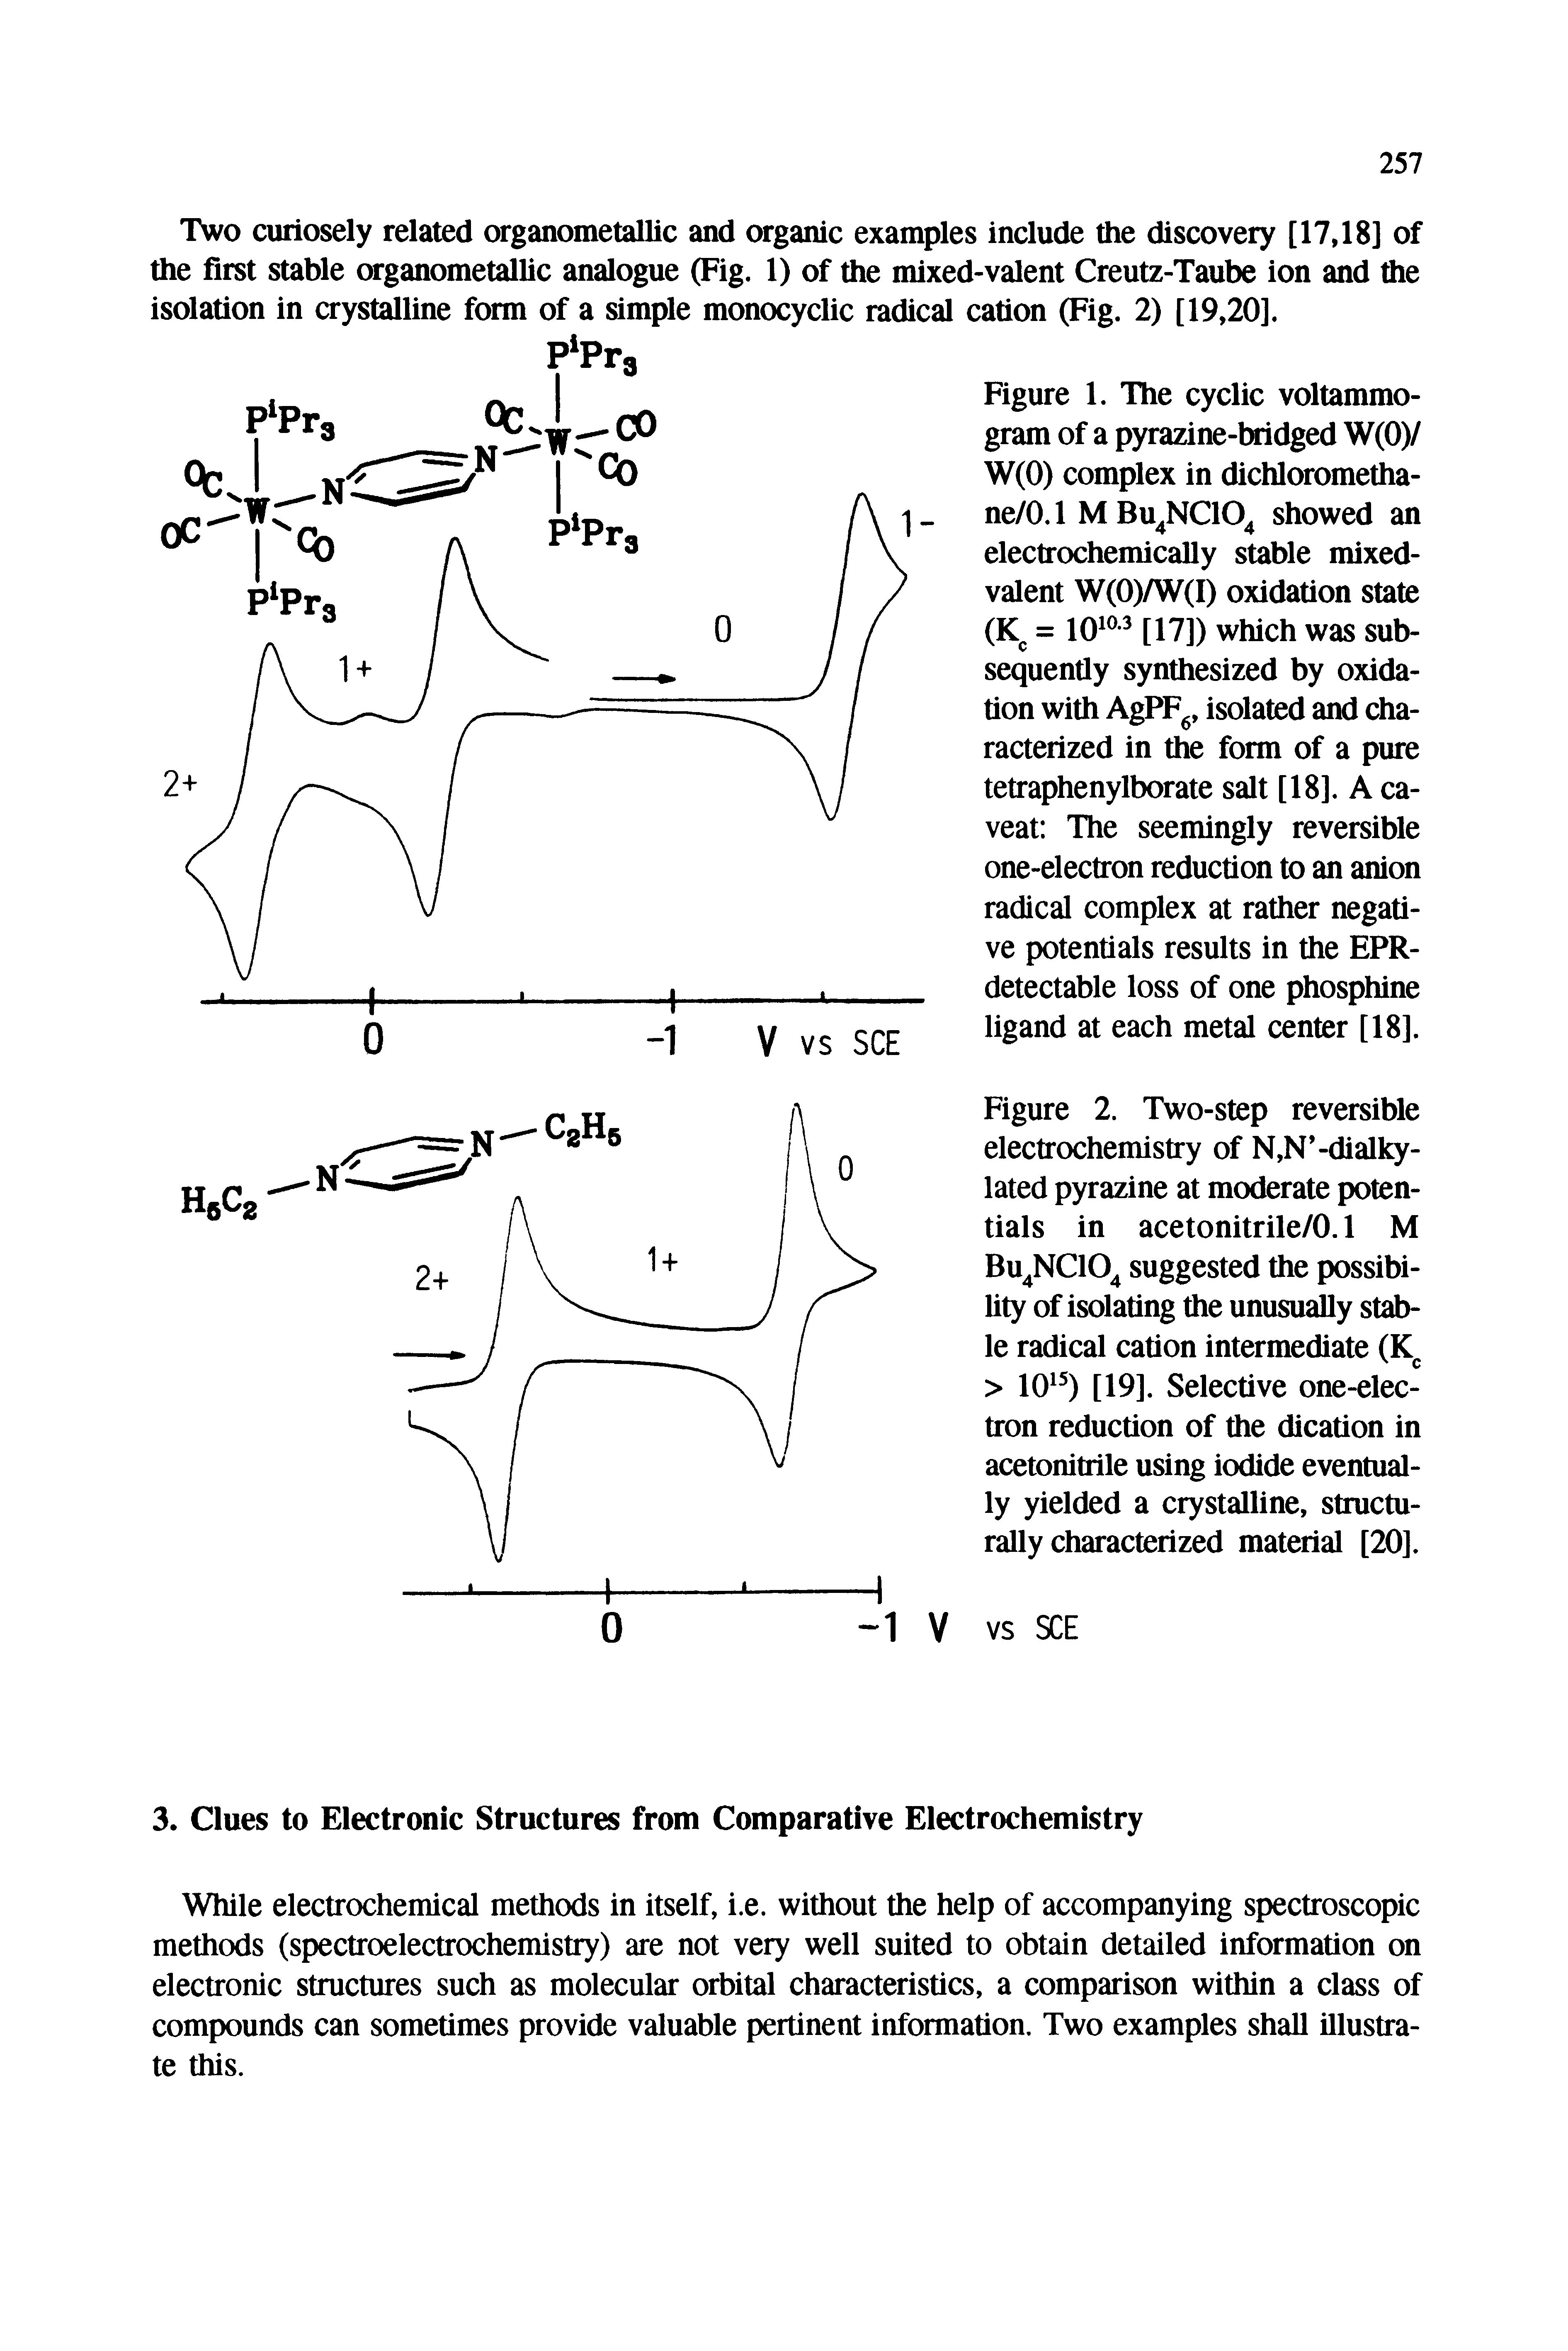 Figure 2. Two-step reversible electrochemistry of N,N -dialky-lated pyrazine at moderate potentials in acetonitrile/0.1 M Bu NClO suggested the possibility of isolating the unusually stable radical cation intermediate (K > 10 0 [19]. Selective one-electron reduction of the dication in acetonitrile using iodide eventually yielded a crystalline, structurally characterized material [20].